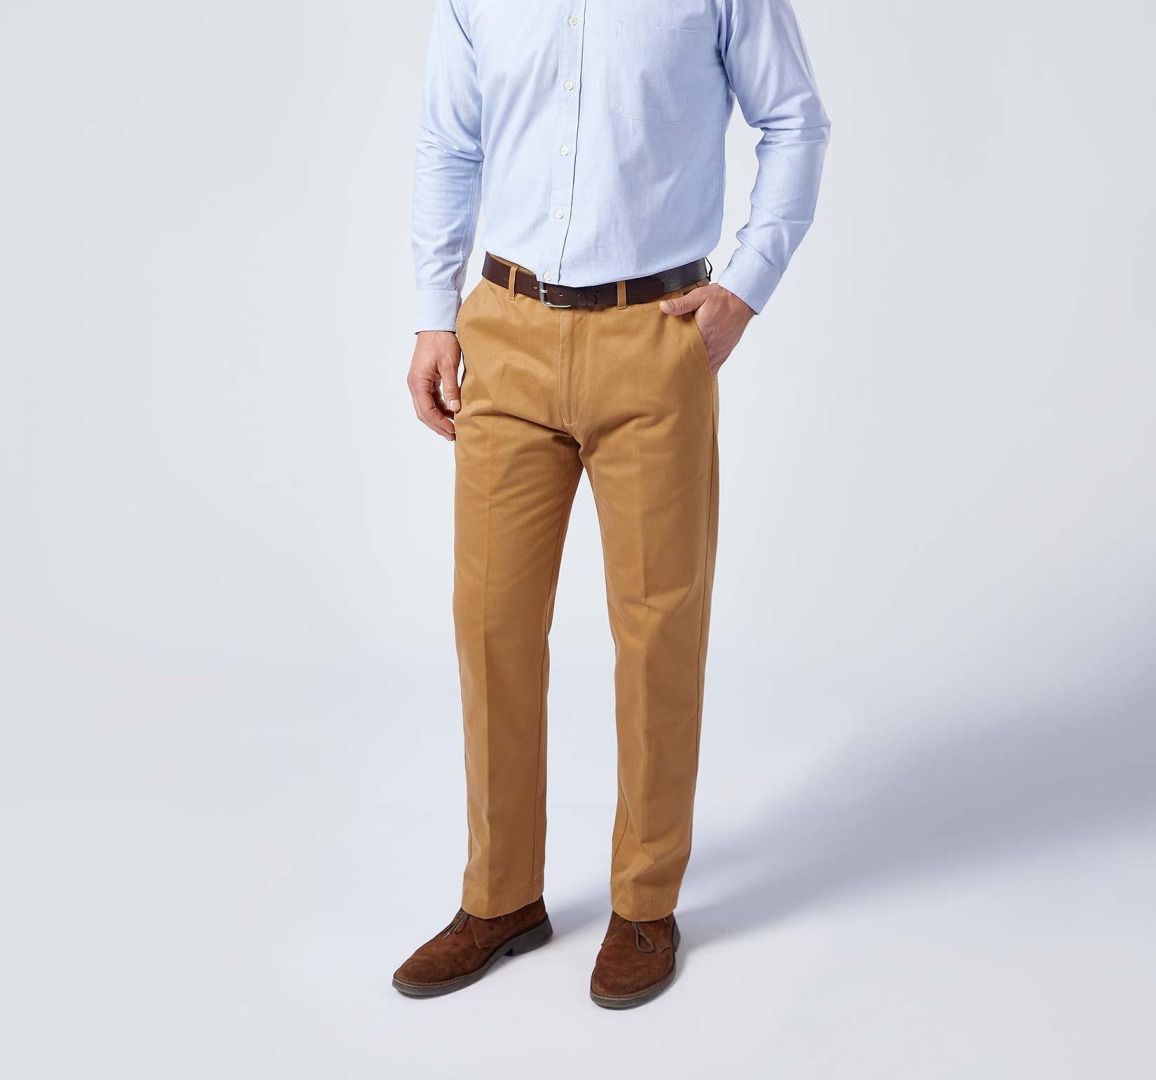 Top 7 Chinos Brands in India That Offer Comfort & Style